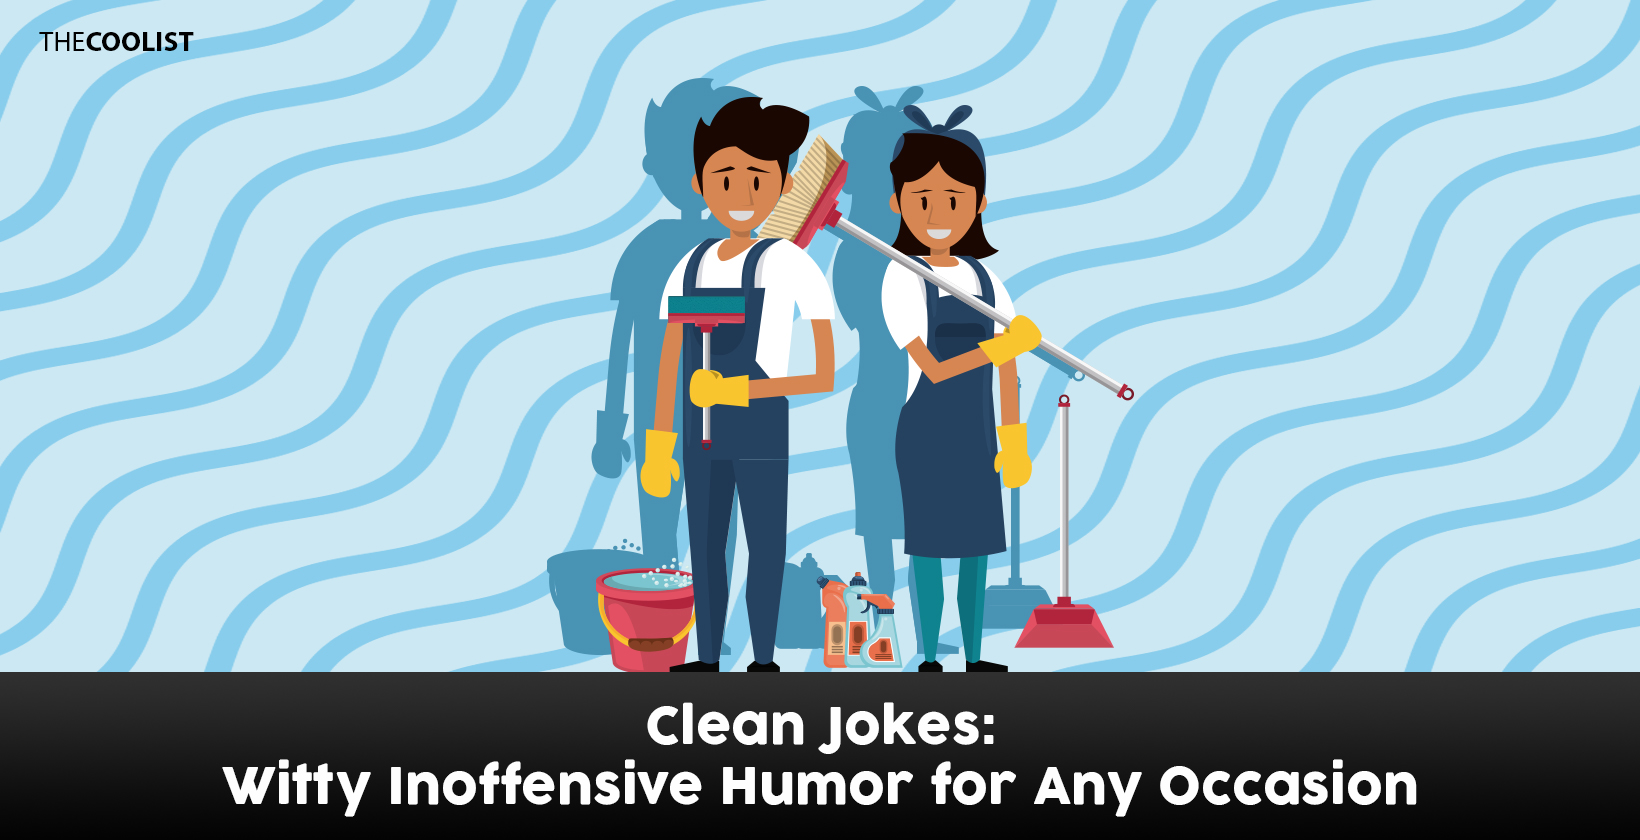 Clean Jokes: Witty Inoffensive Humor for Any Occasion